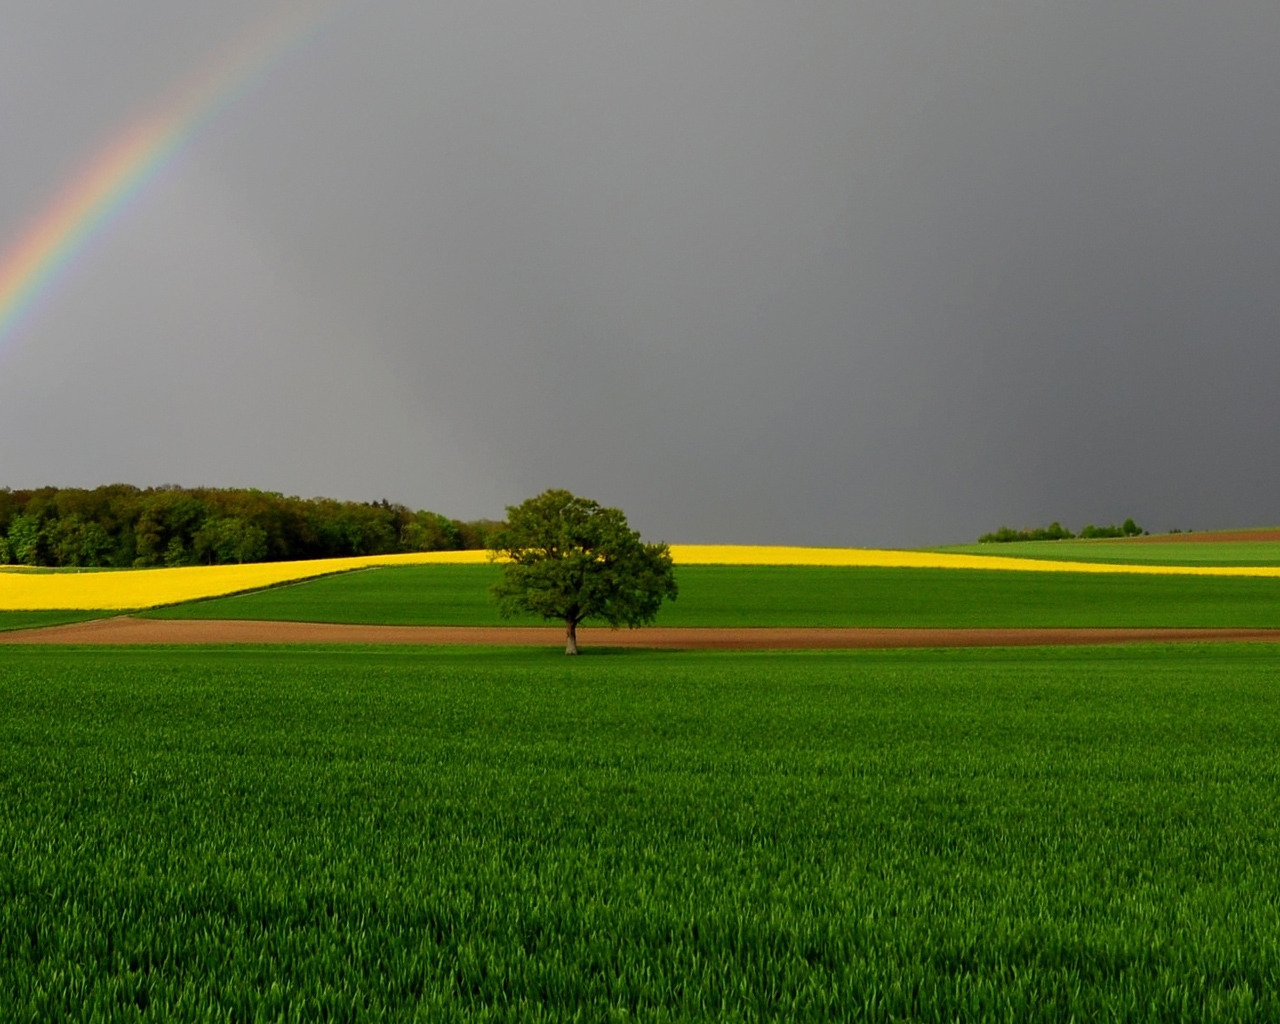 Green Fields and Rainbow for 1280 x 1024 resolution